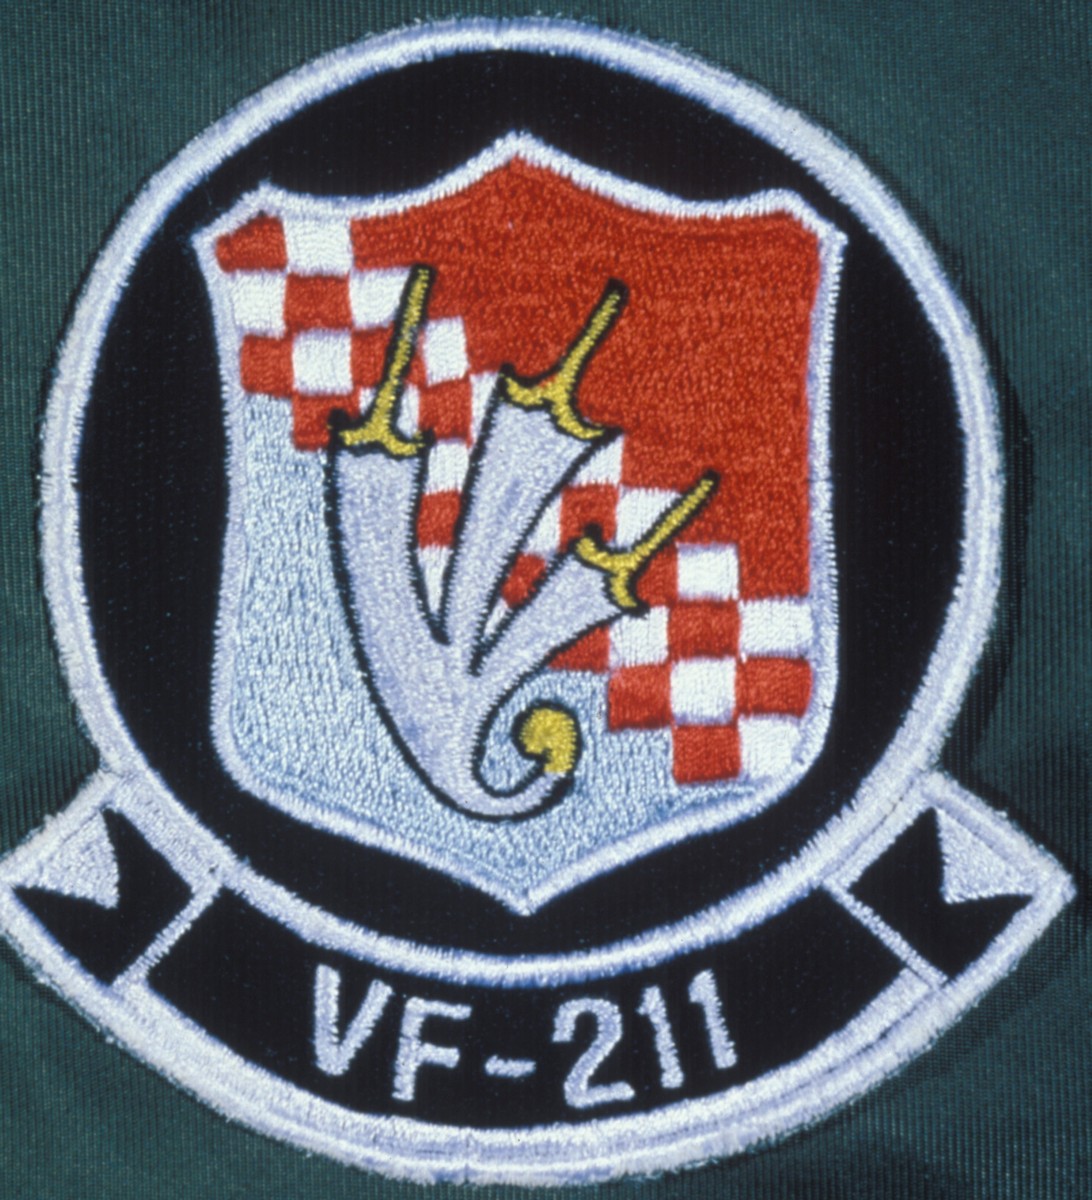 vf-211 fighting checkmates fighter squadron patch crest insignia badge fighter squadron us navy f-14 tomcat f-8 crusader